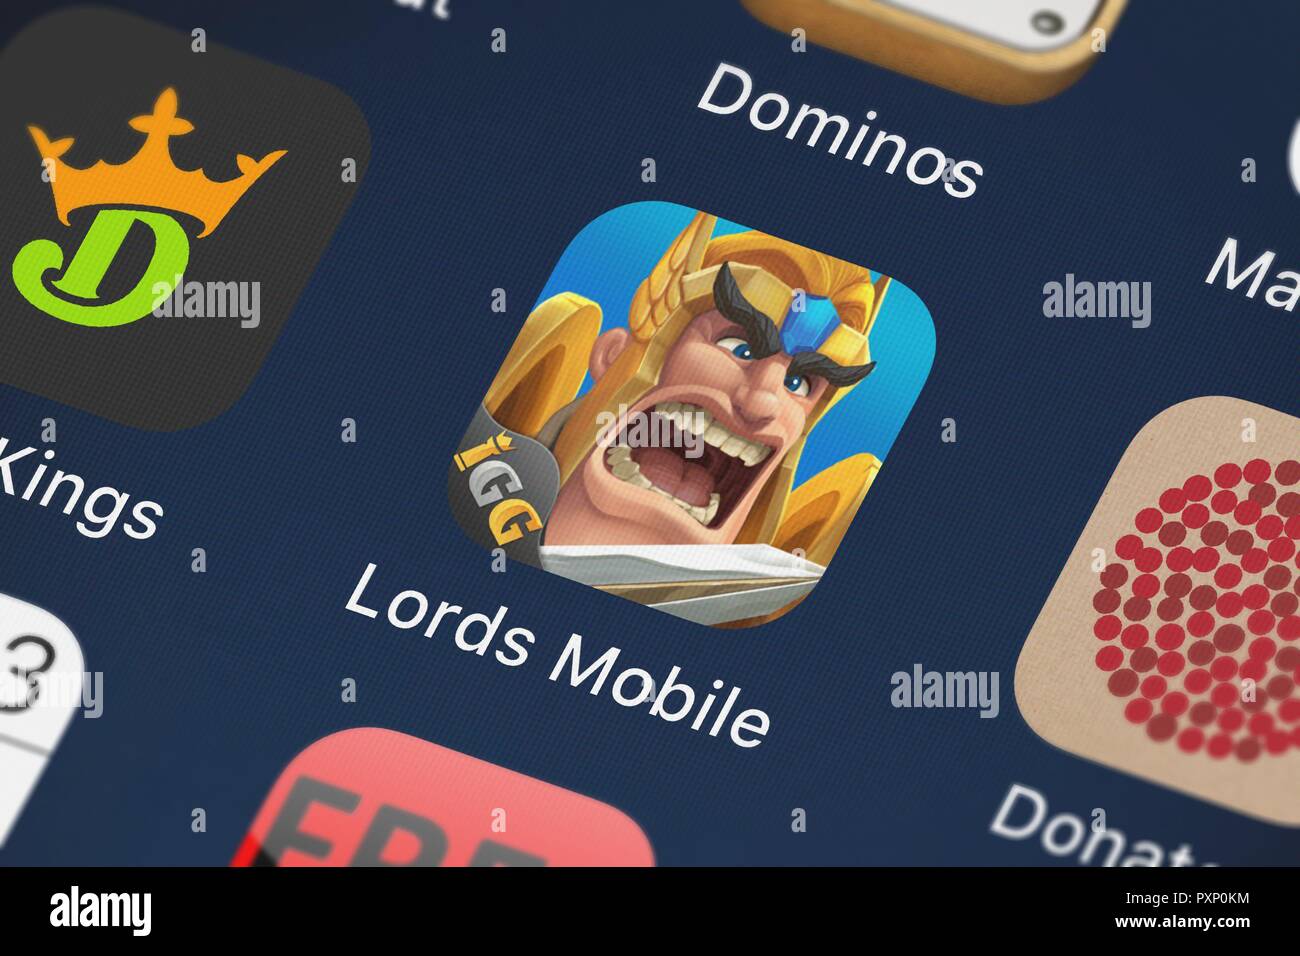 How to find Lords Mobile IGG ID?